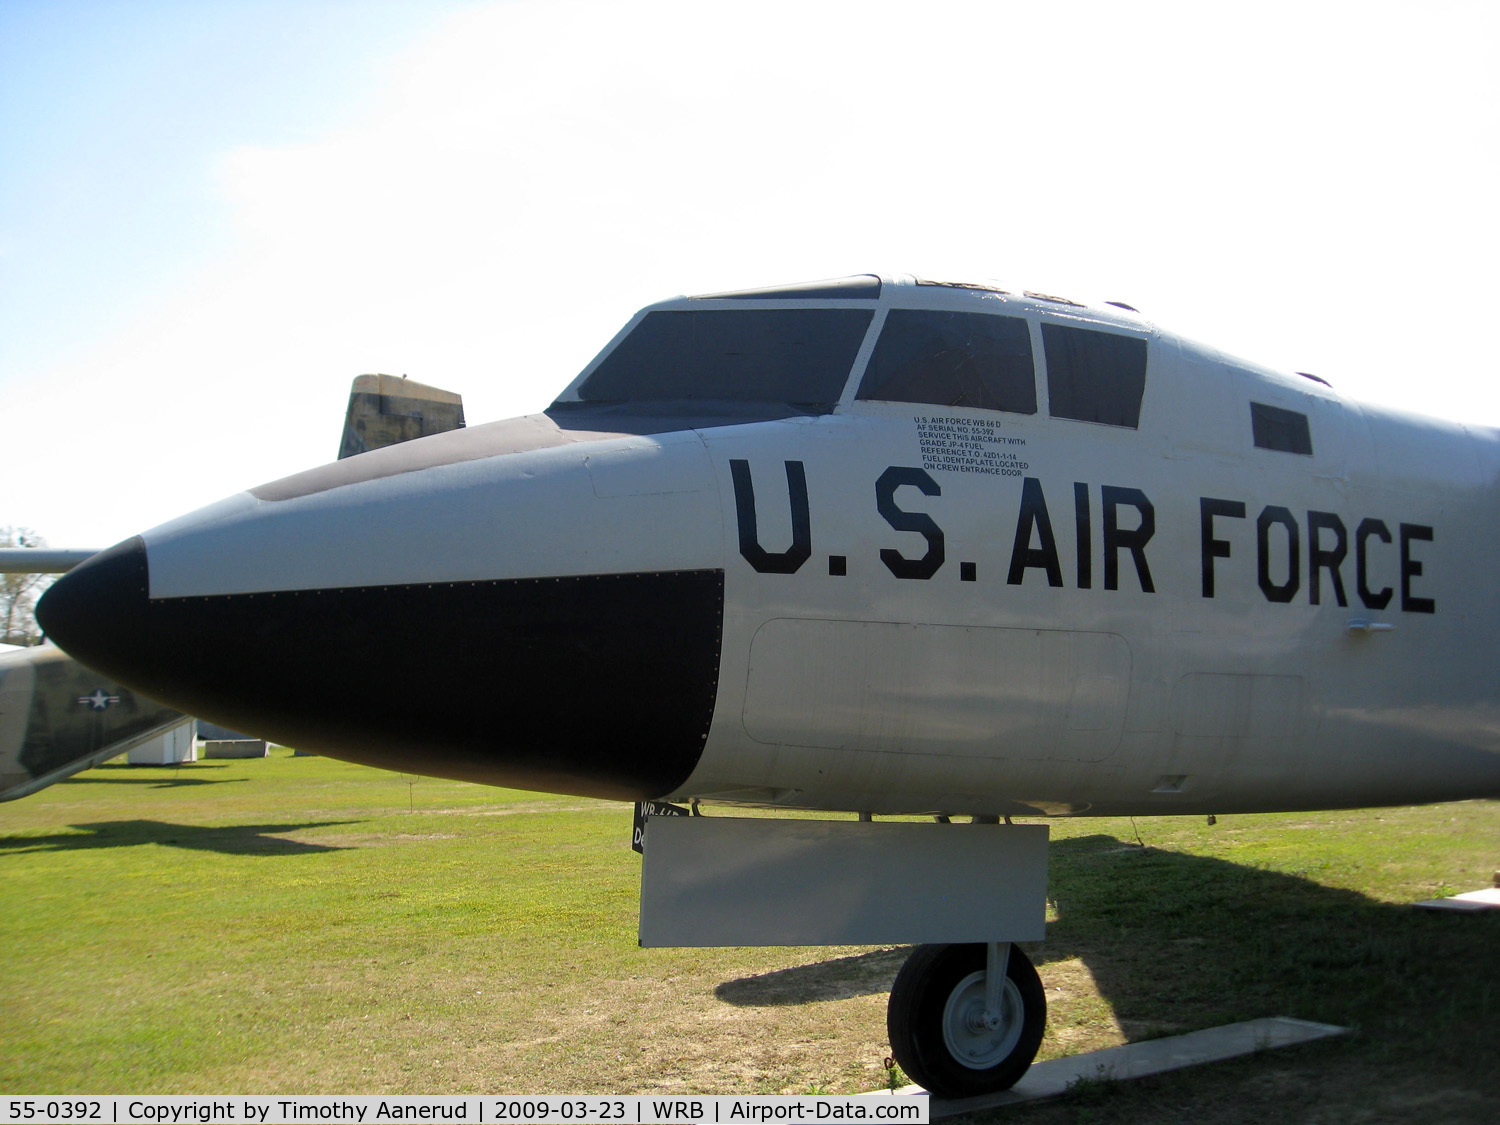 55-0392, 1955 Douglas WB-66D Destroyer C/N 45024, Museum of Aviation, Robins AFB